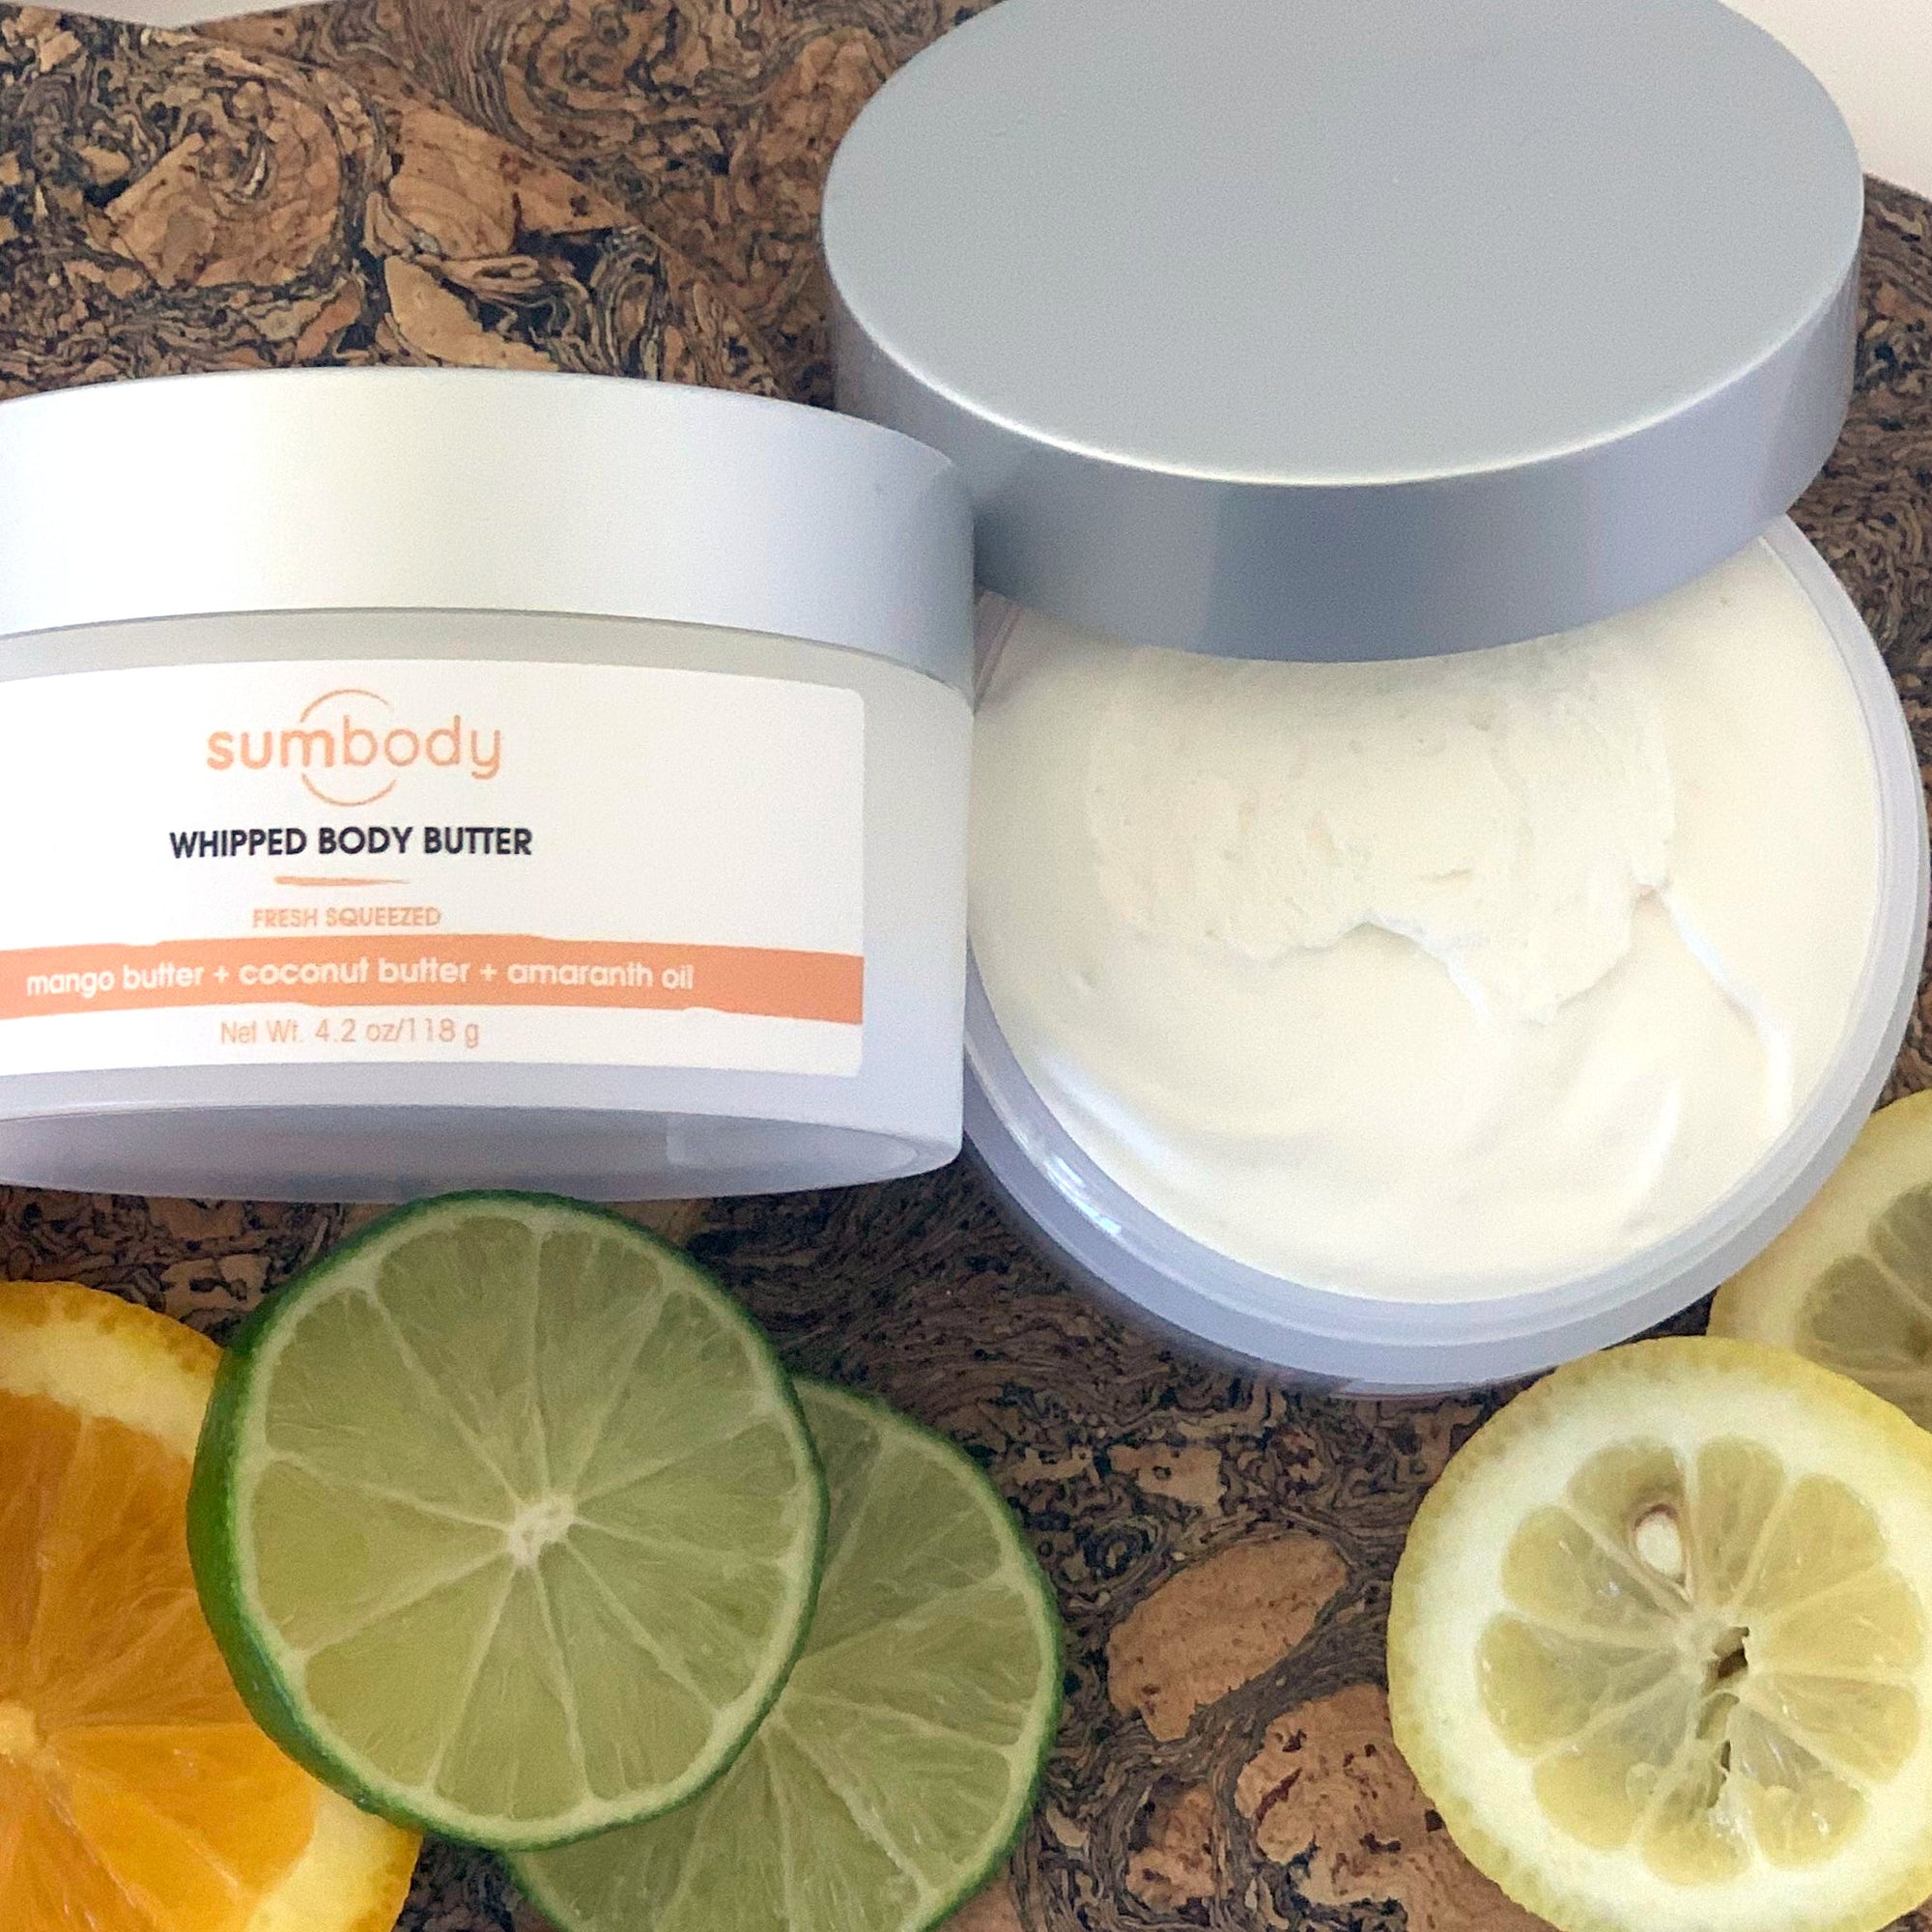 Fresh Squeezed Whipped Body Butter